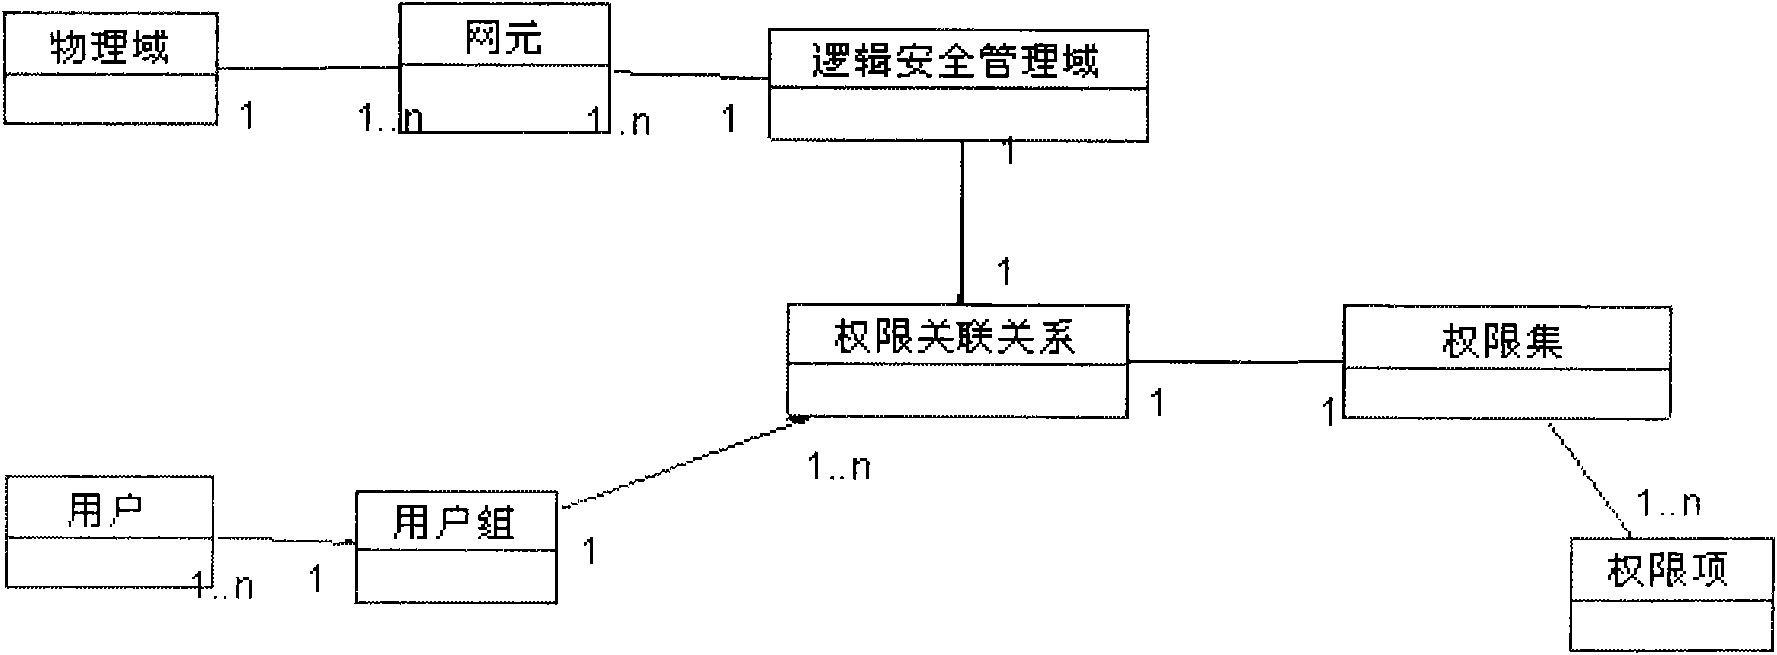 Multi-domain security management method for network management system